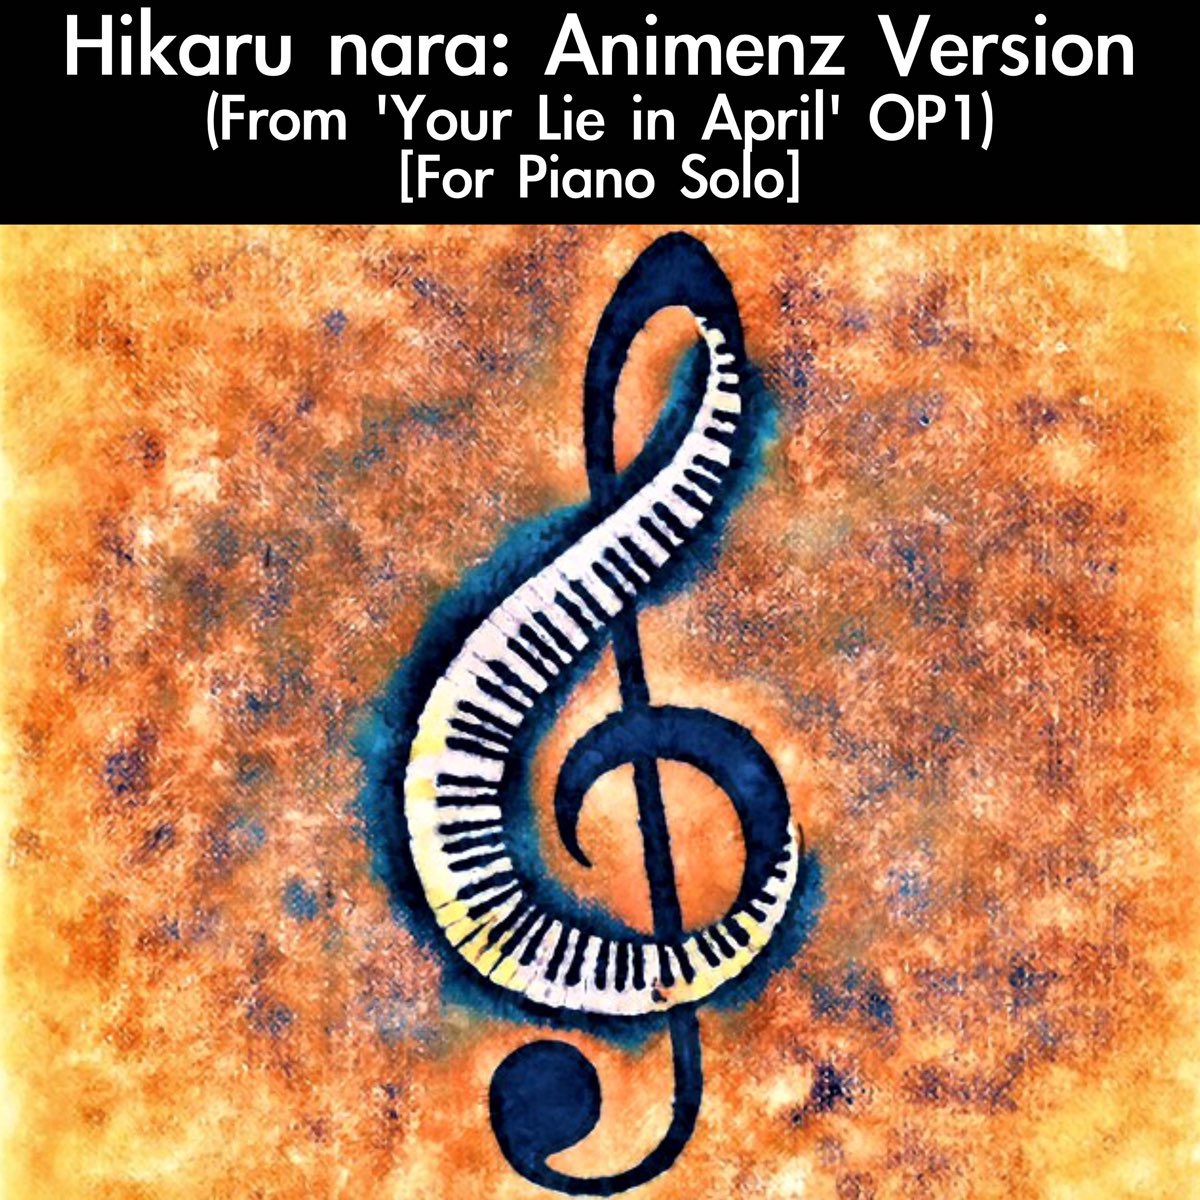 Hikaru Nara: Animenz Version (From Your Lie in April Op1) [for Piano  Solo] - Single - Album by daigoro789 - Apple Music